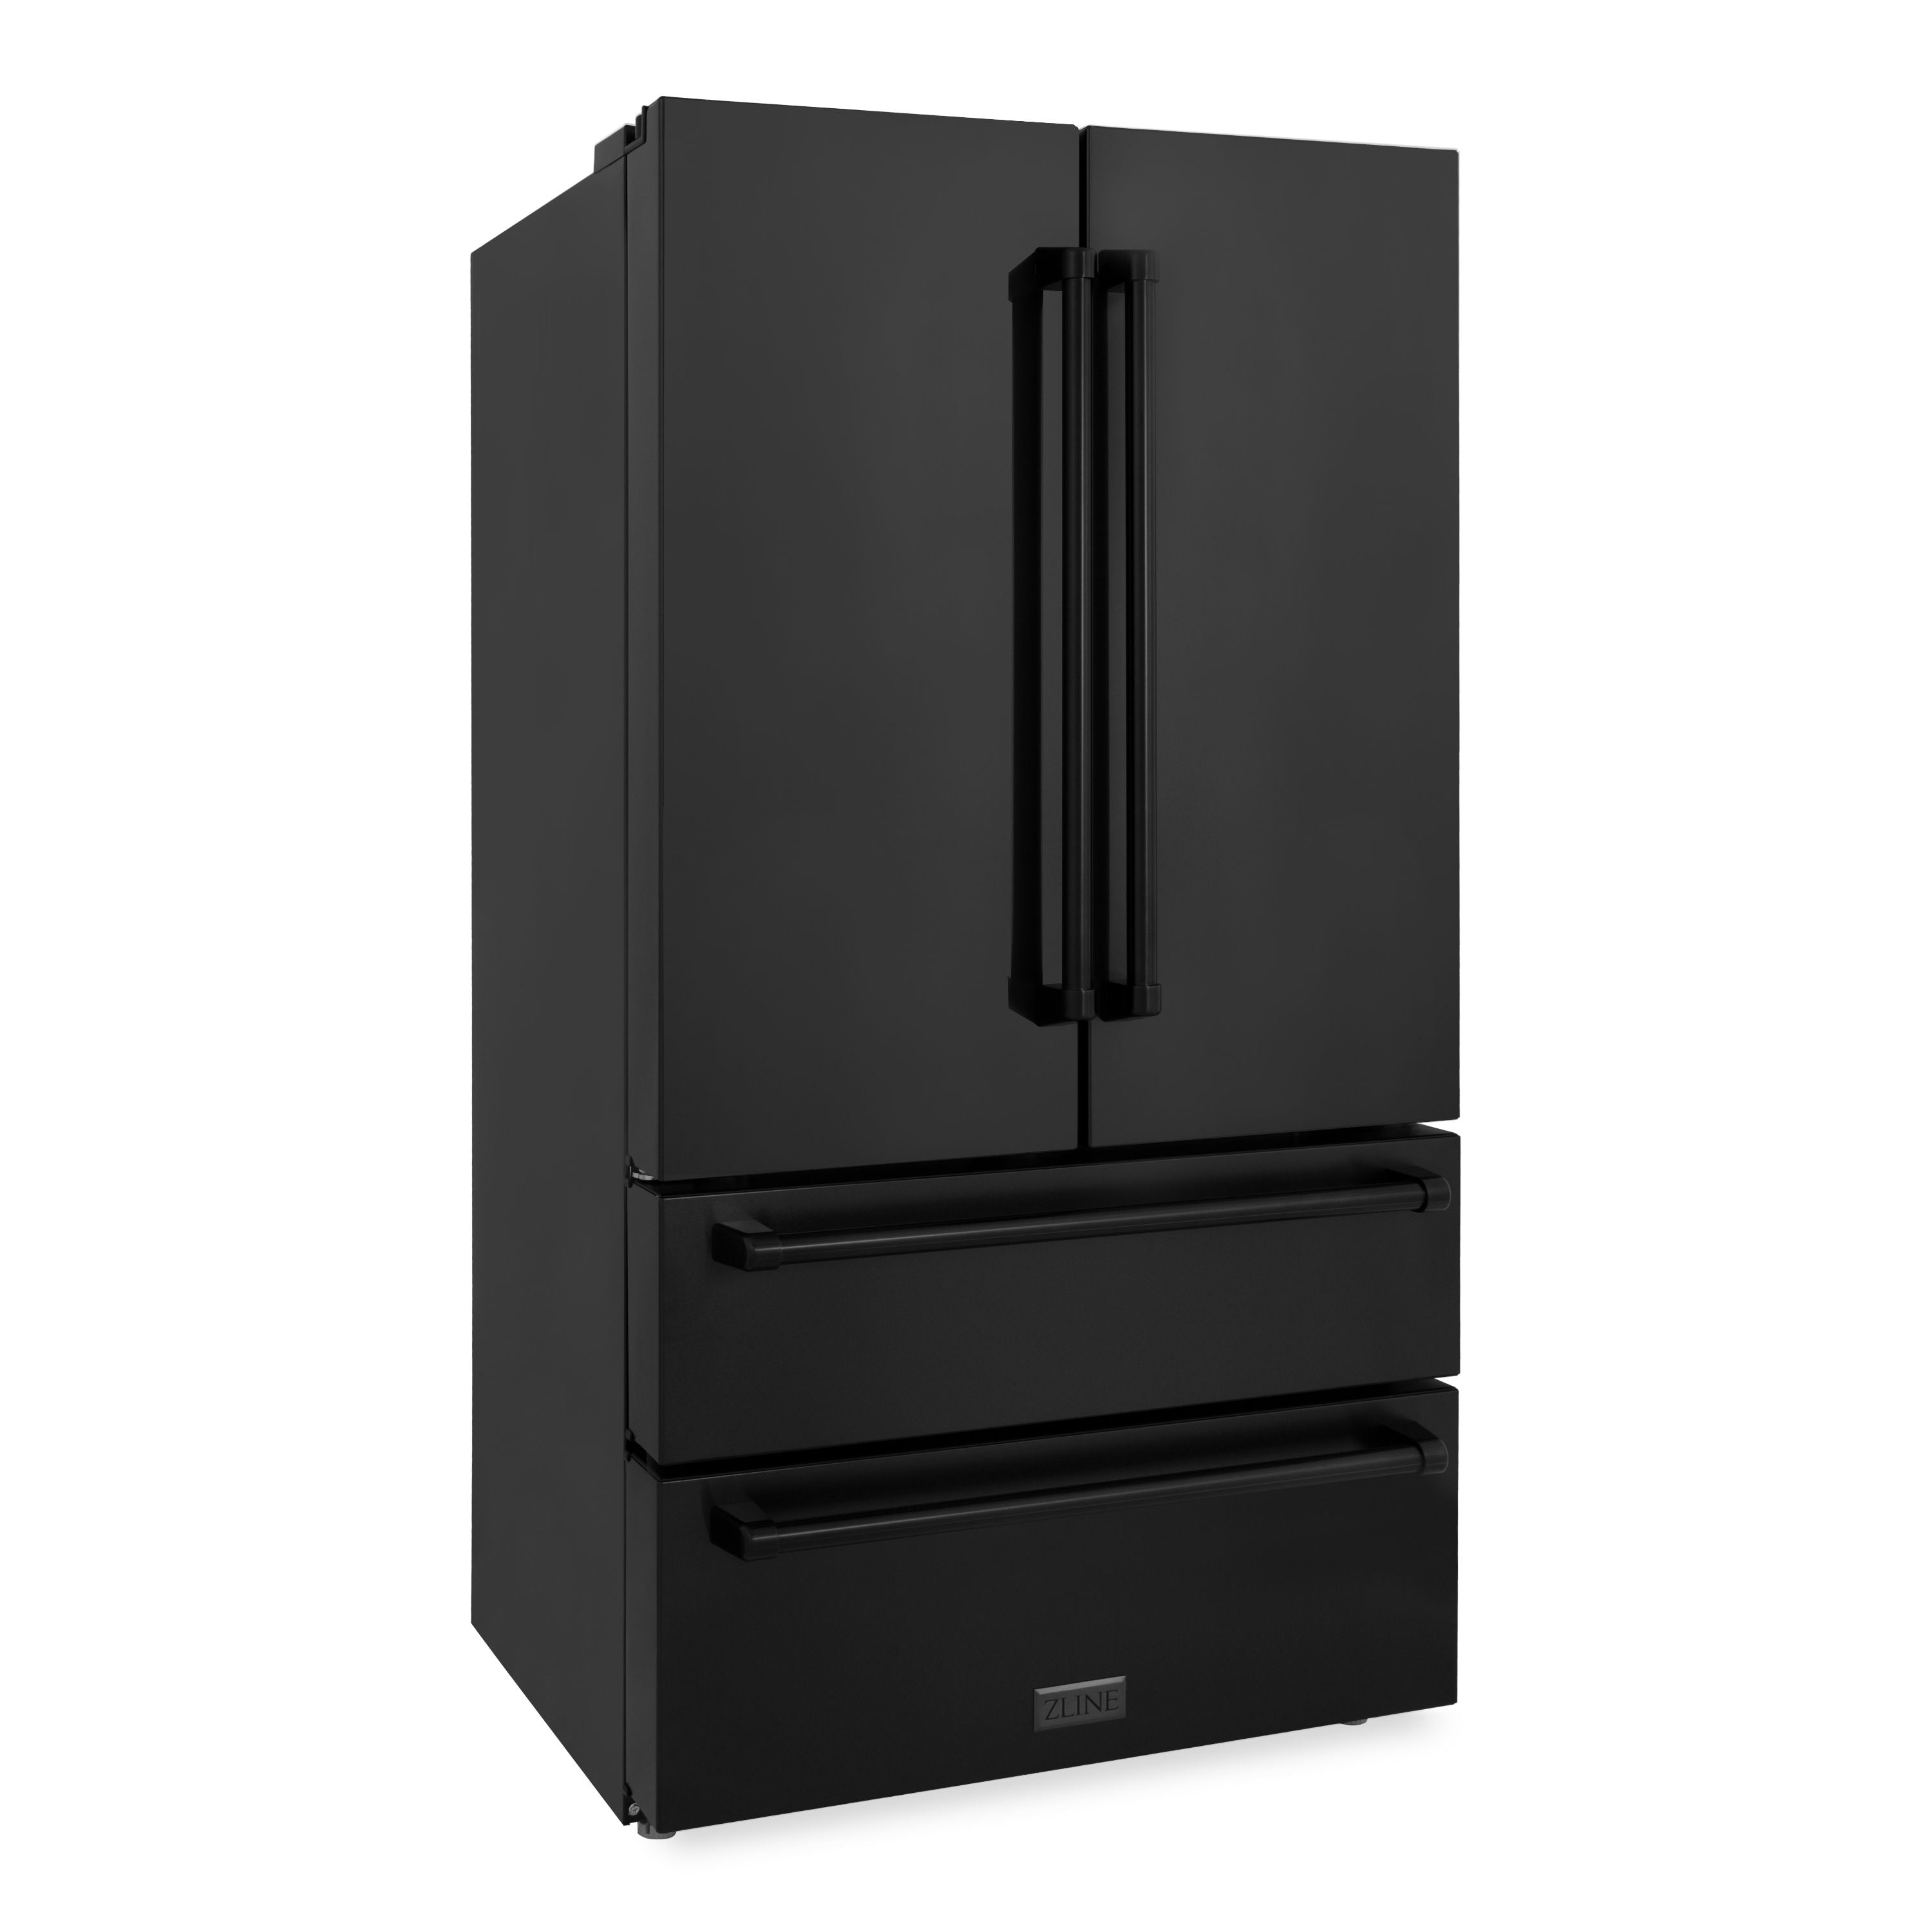 ZLINE 36 inch 22.5 cu. ft. French Door Refrigerator with Ice Maker in Black Stainless Steel 1